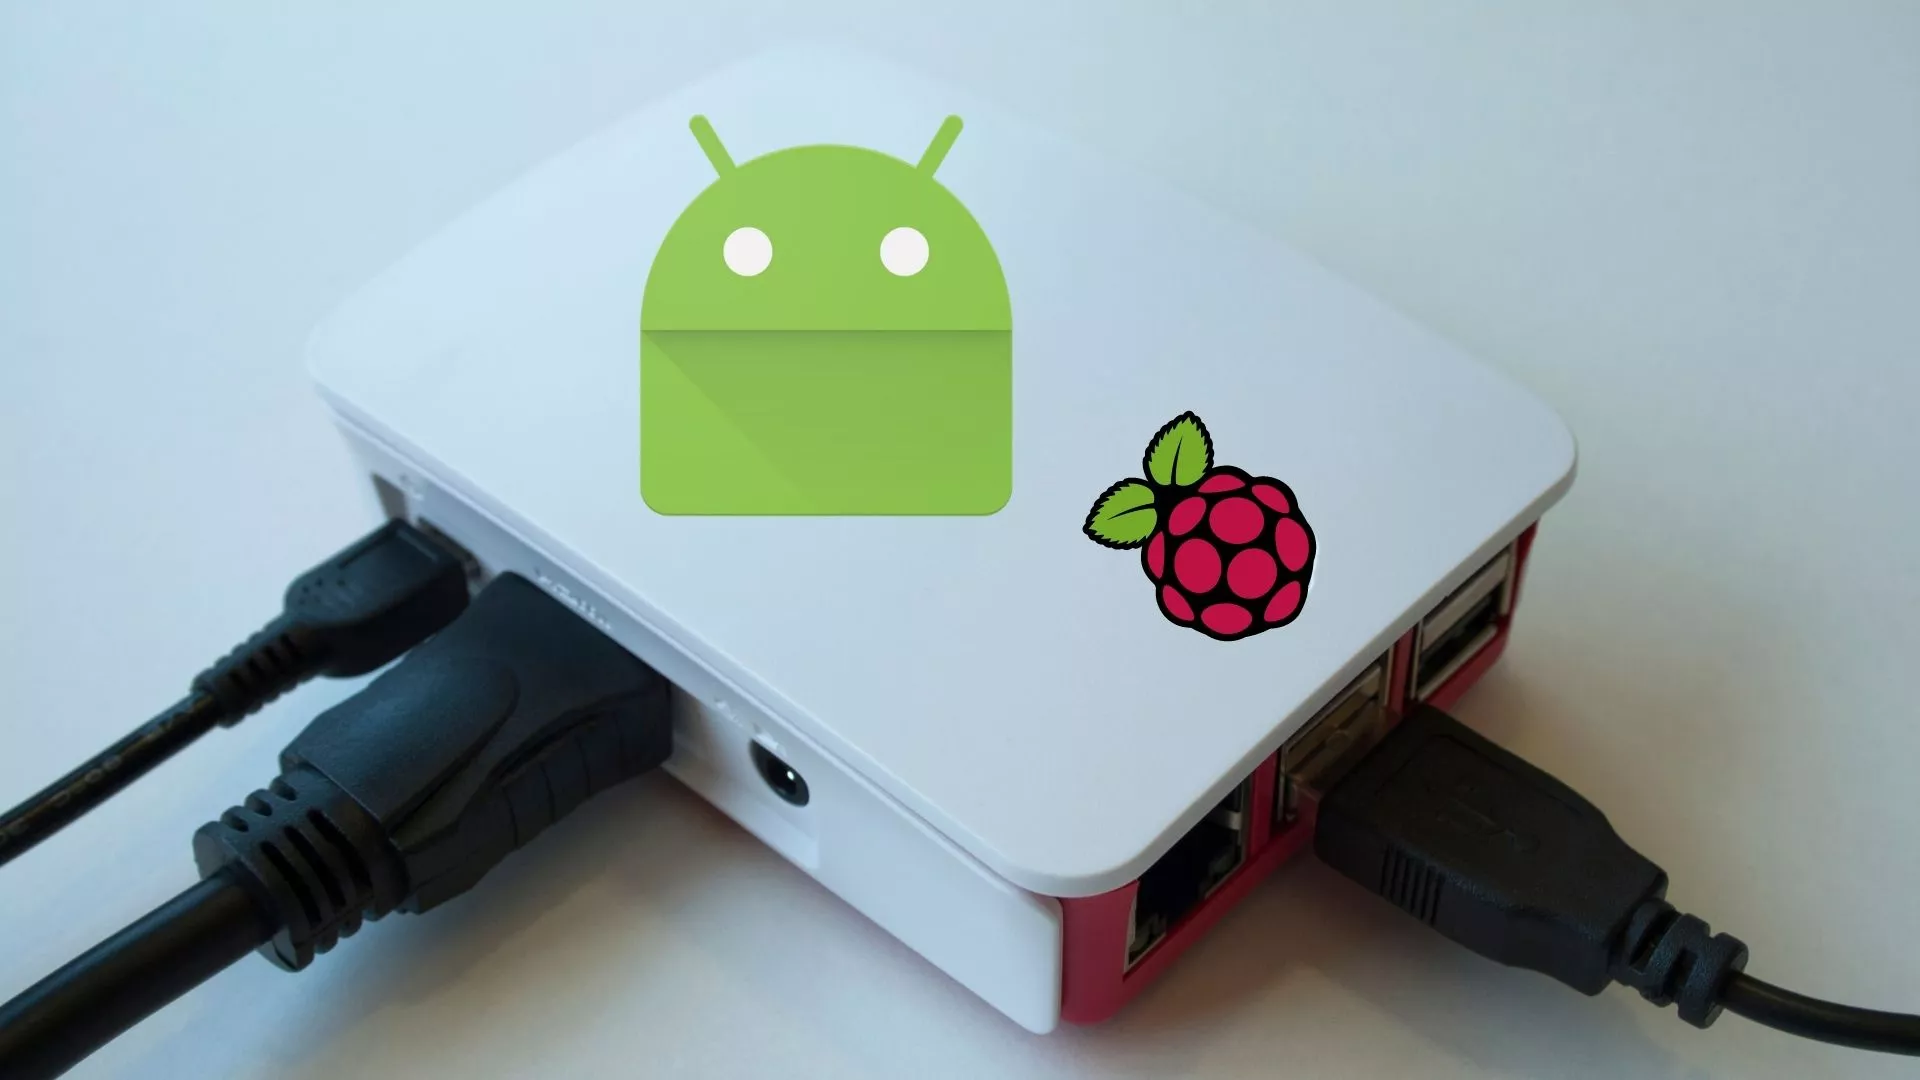 install android on raspberry pi 4